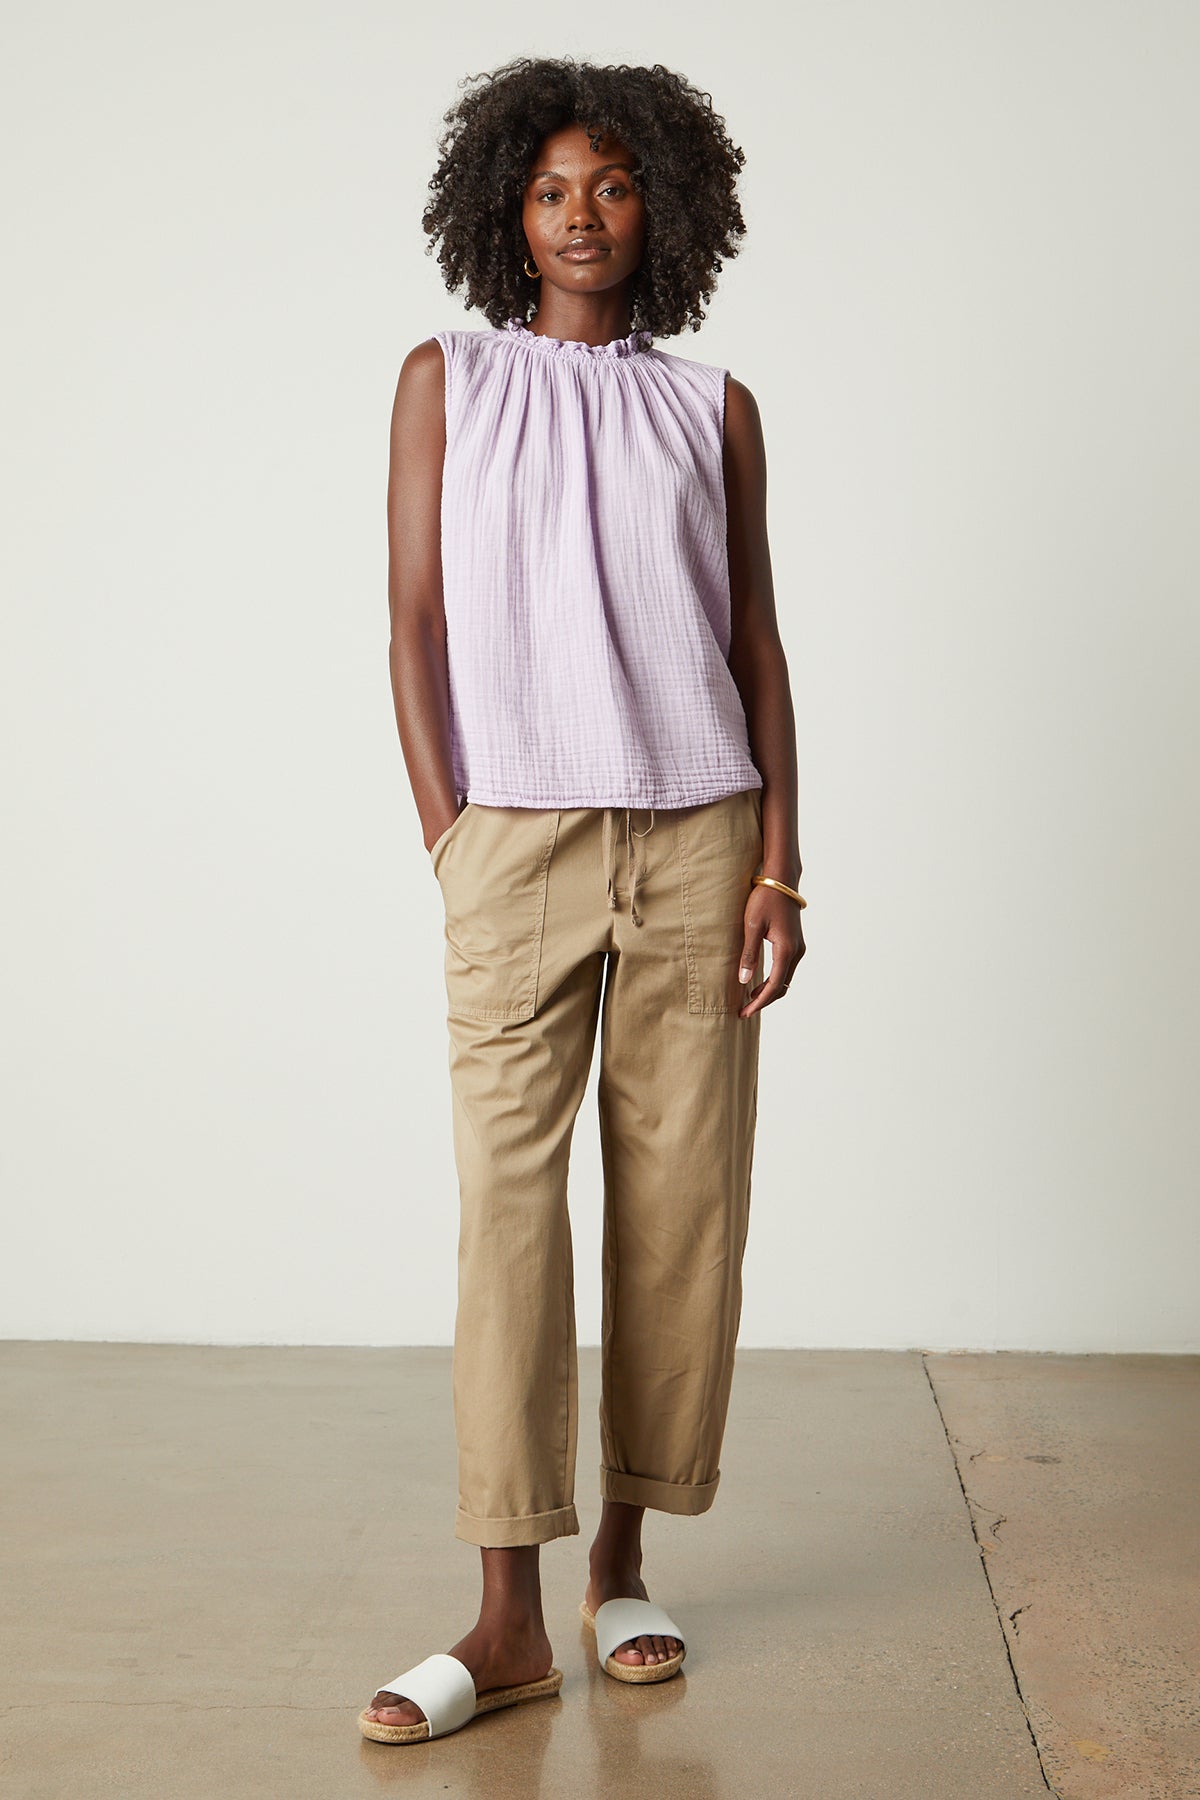 the model is wearing a Velvet by Graham & Spencer BIANCA COTTON GAUZE TANK TOP and khaki pants.-26317127352513